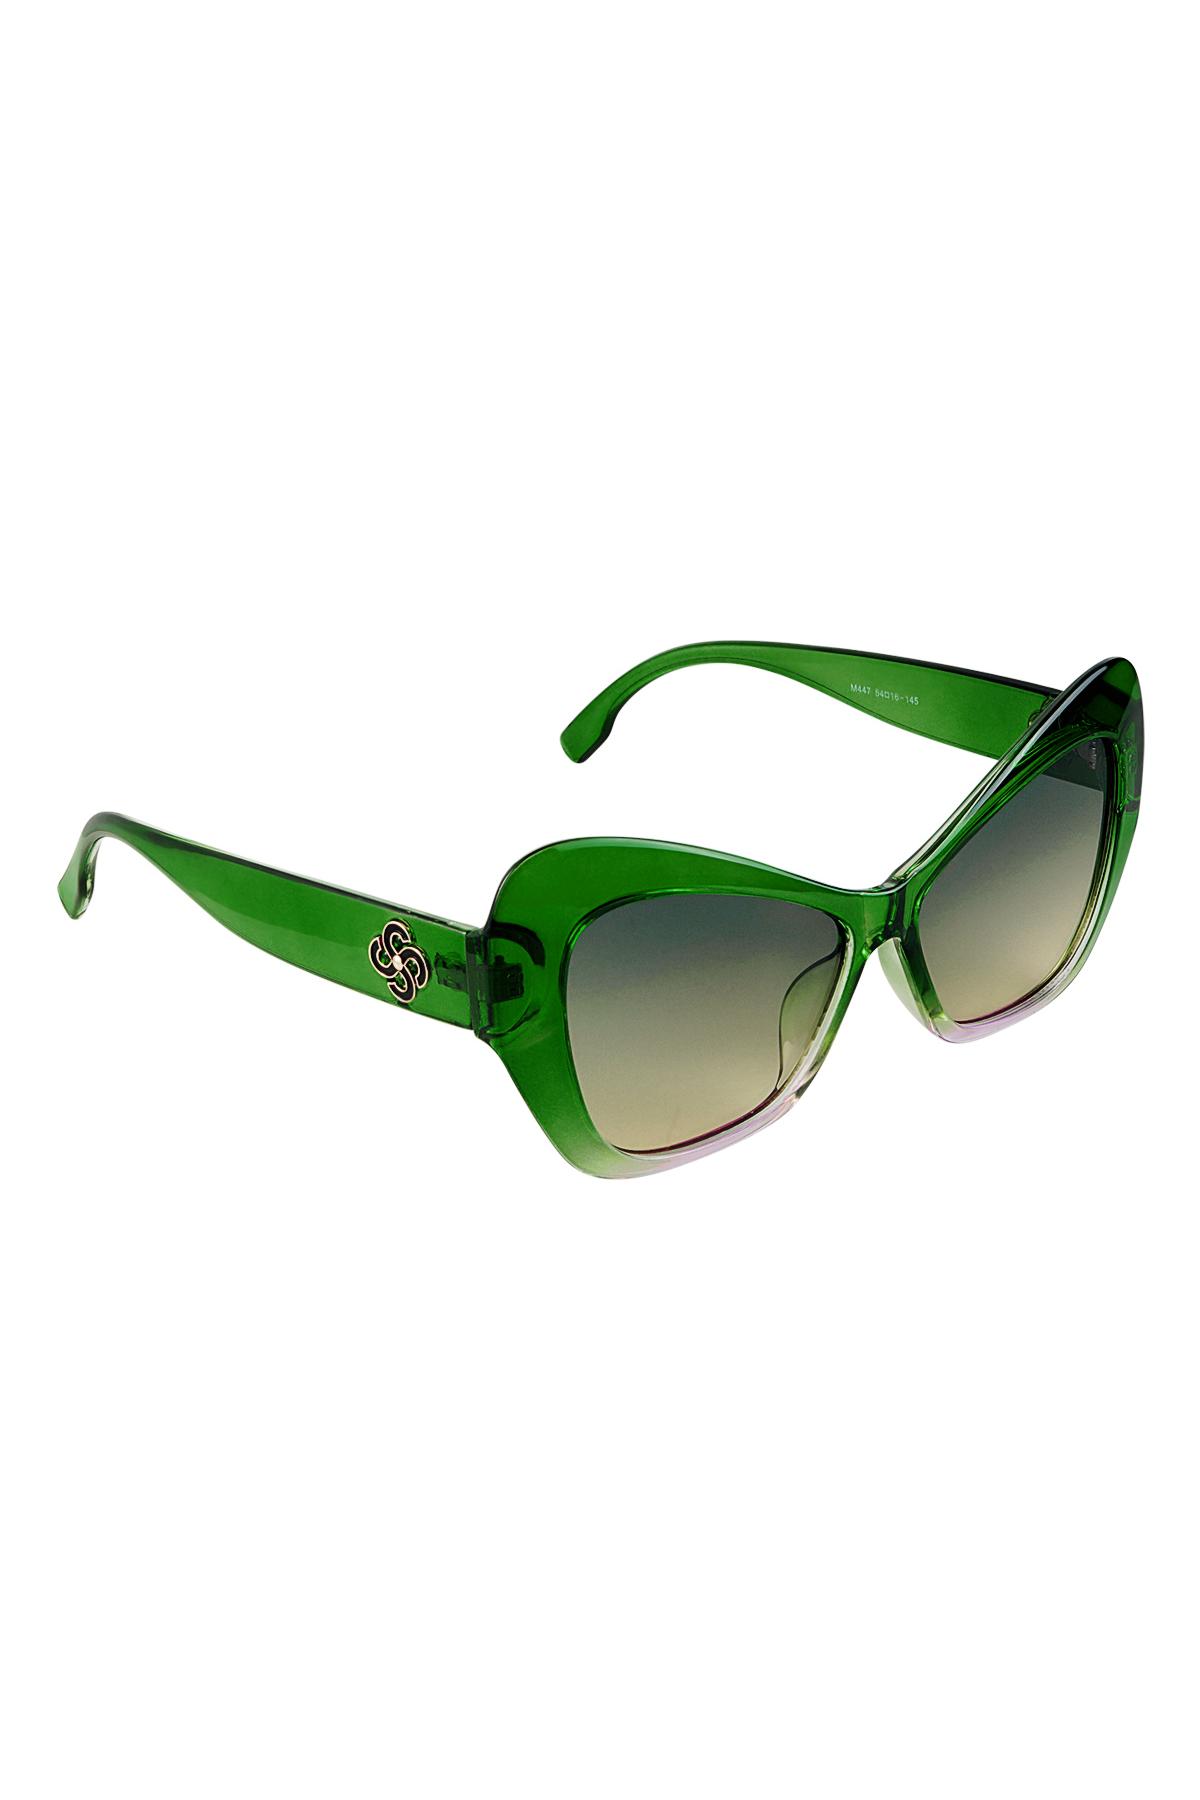 Sunglasses statement Green PC One size h5 